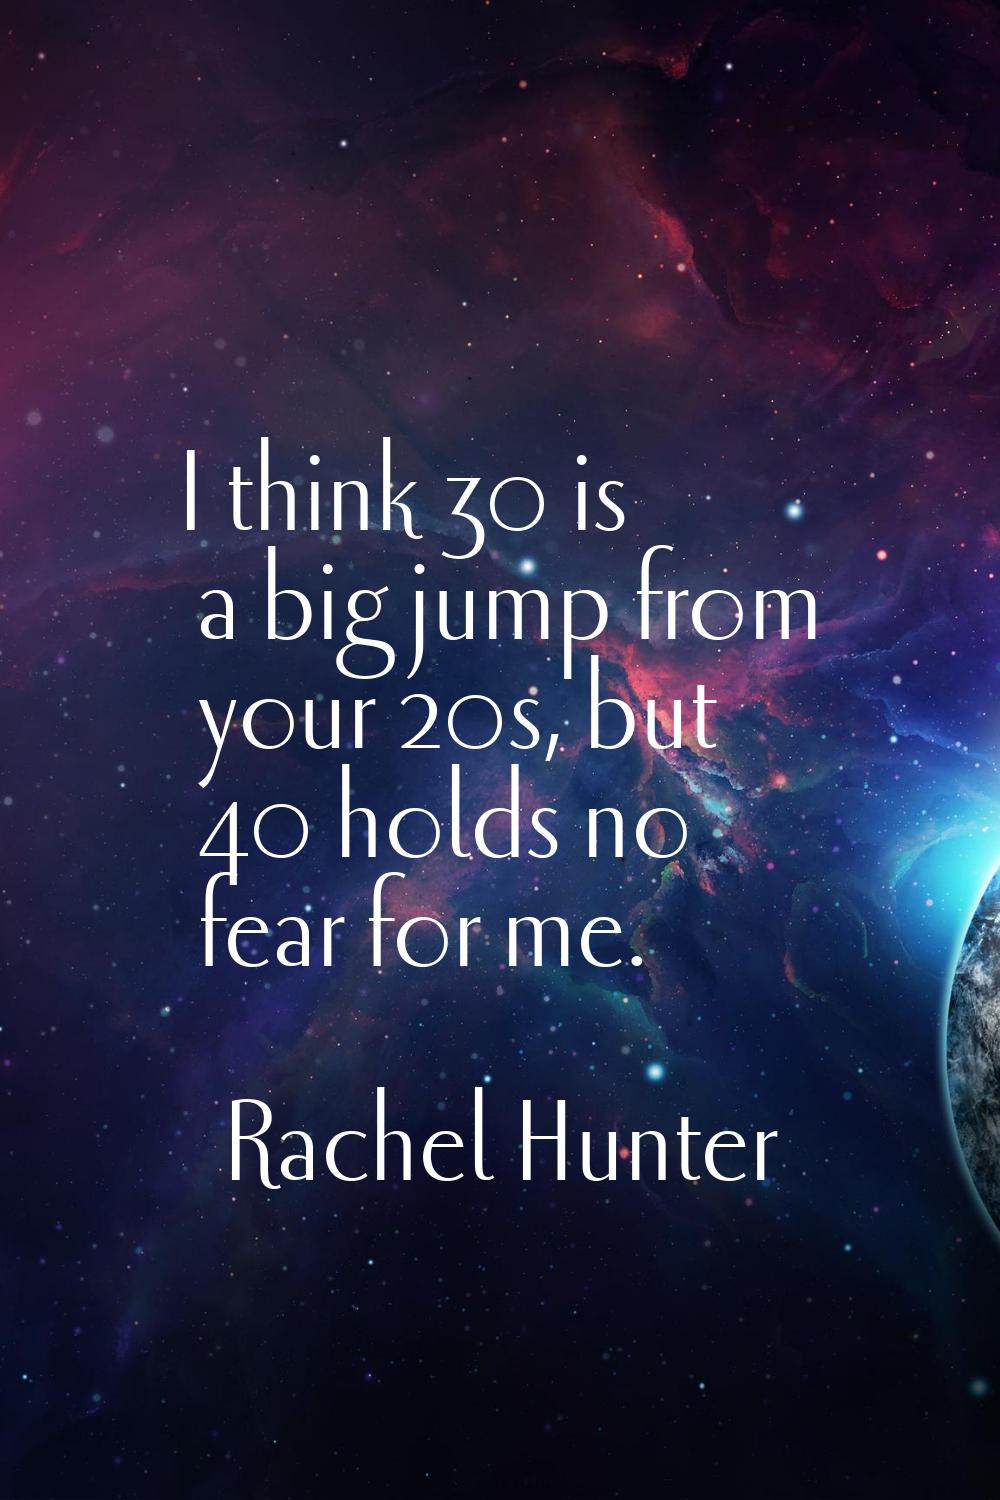 I think 30 is a big jump from your 20s, but 40 holds no fear for me.